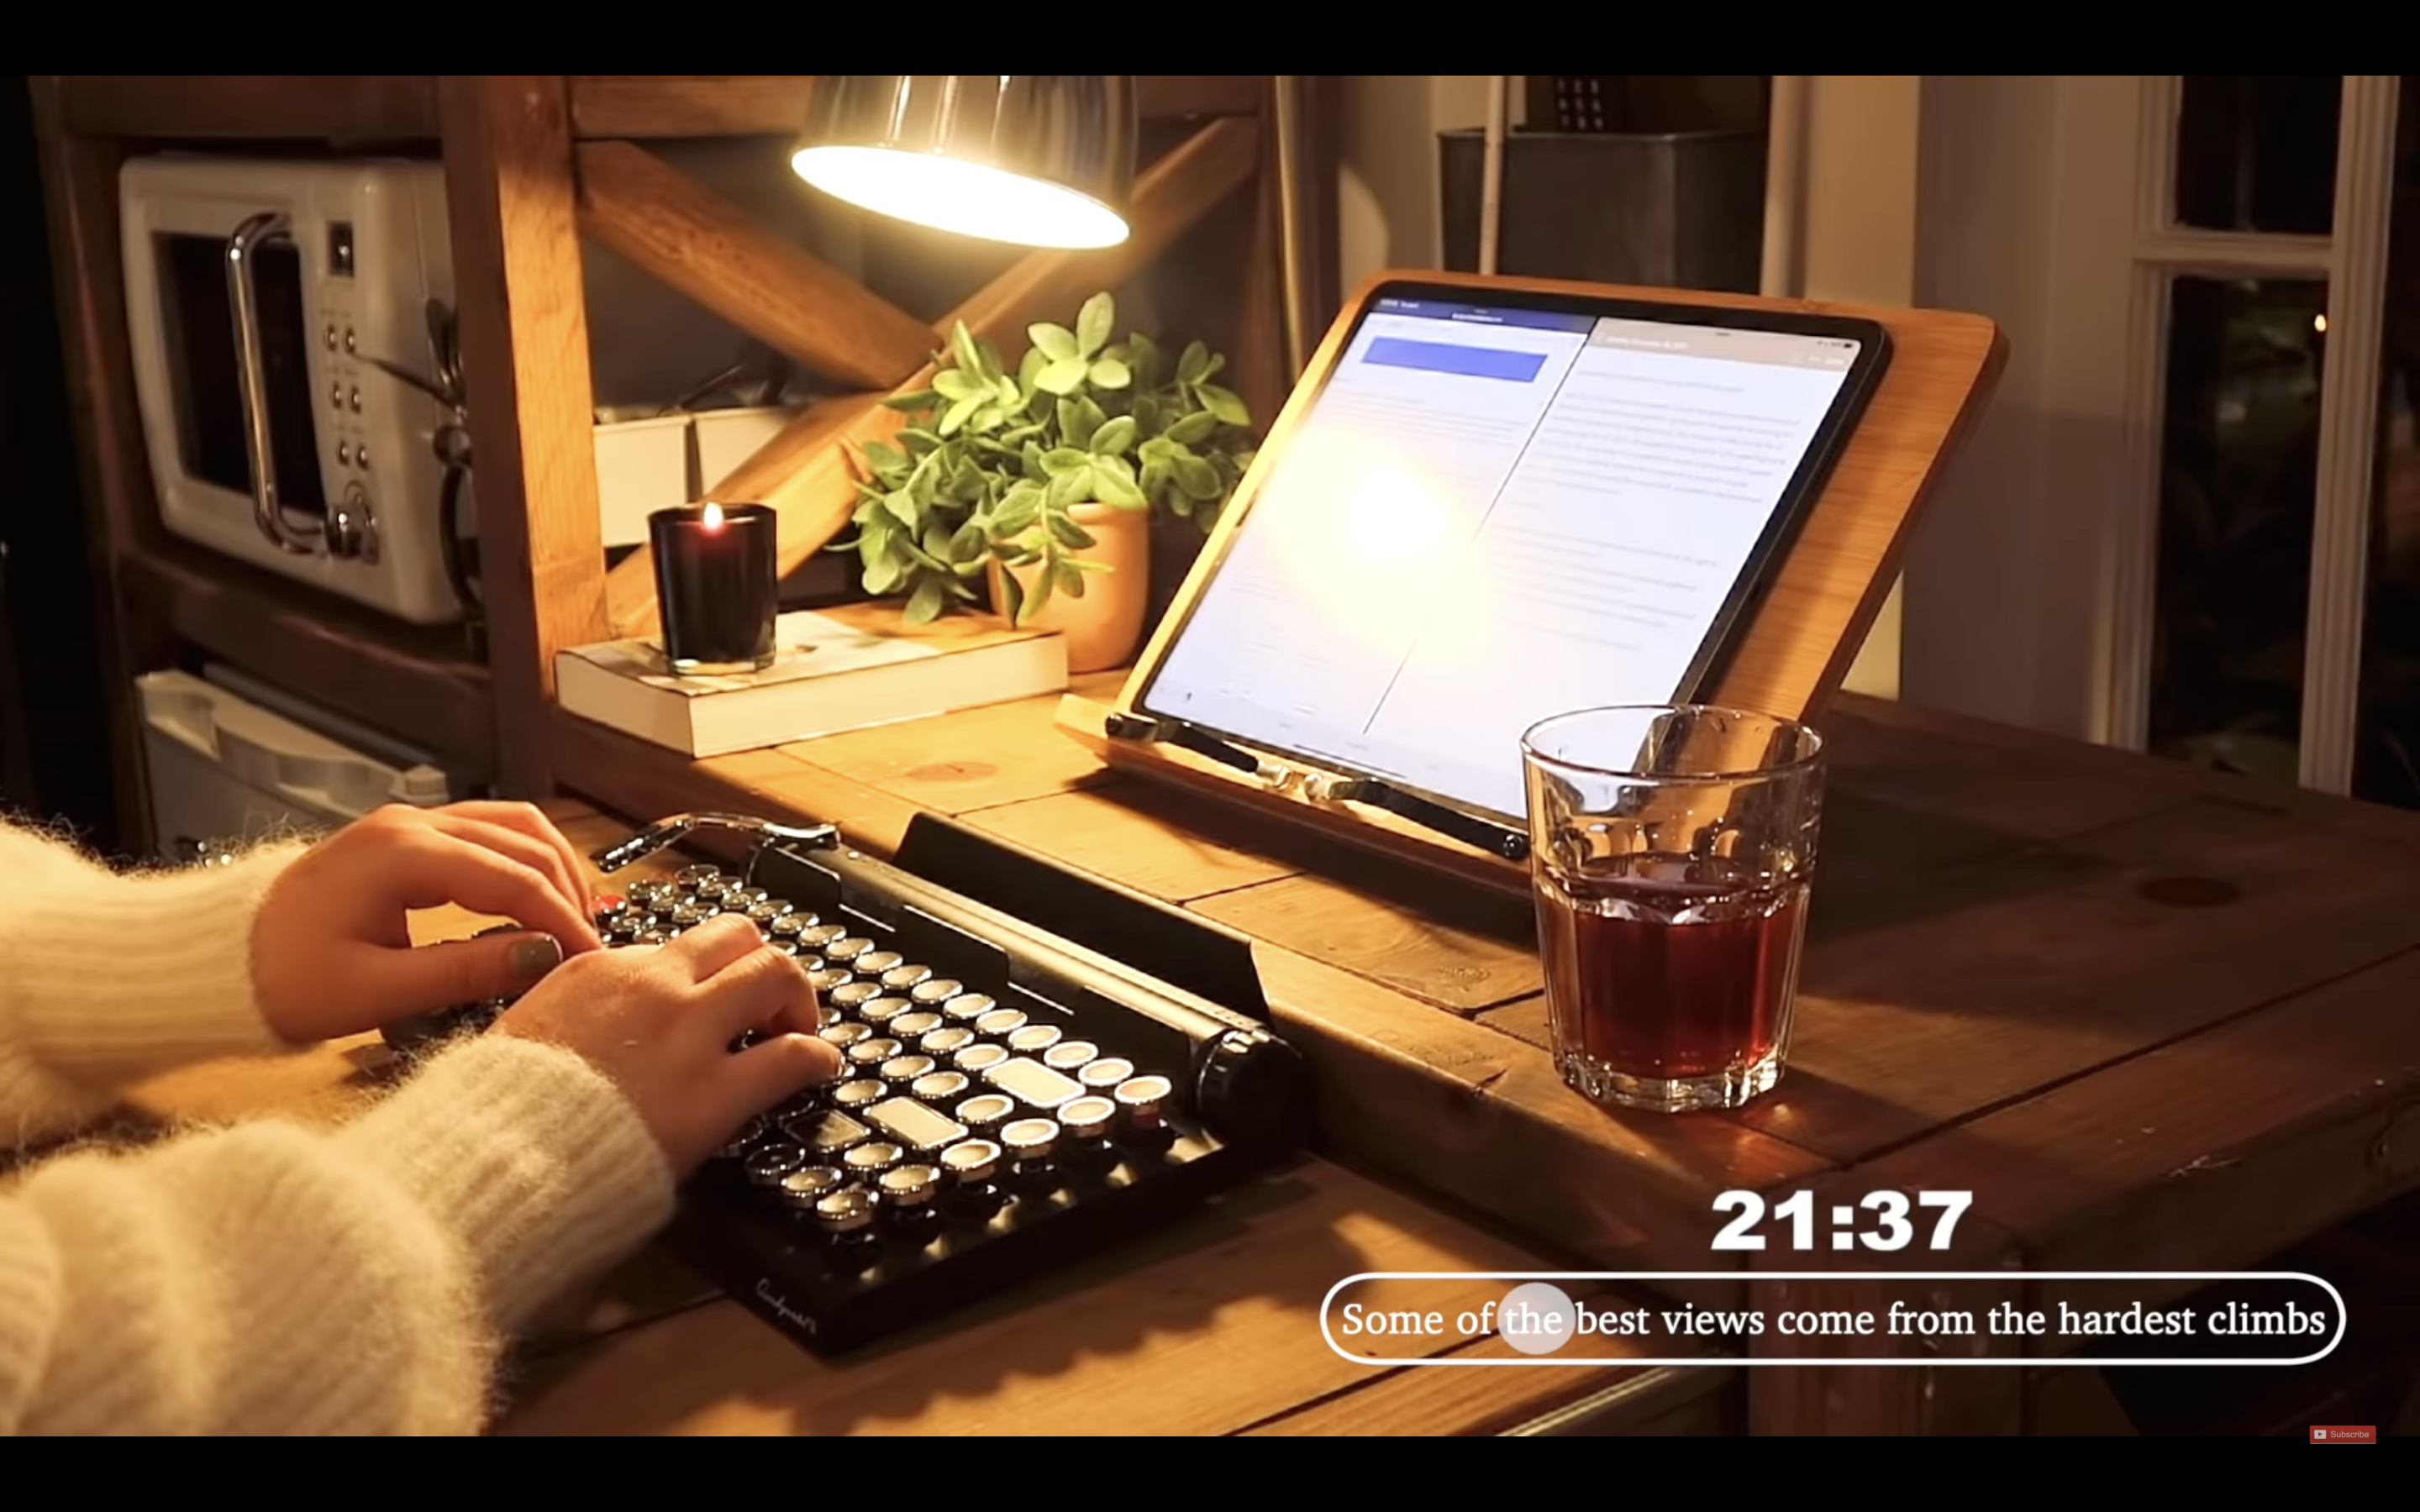 Screenshot of a "study with me" video from The Sherry Formula. A person (face not visible) is using a typewriter-style keyboard with a tablet at night. The timer at the bottom right corner reads "21:37" and includes the quote "Some of the best views come from the hardest climbs". 